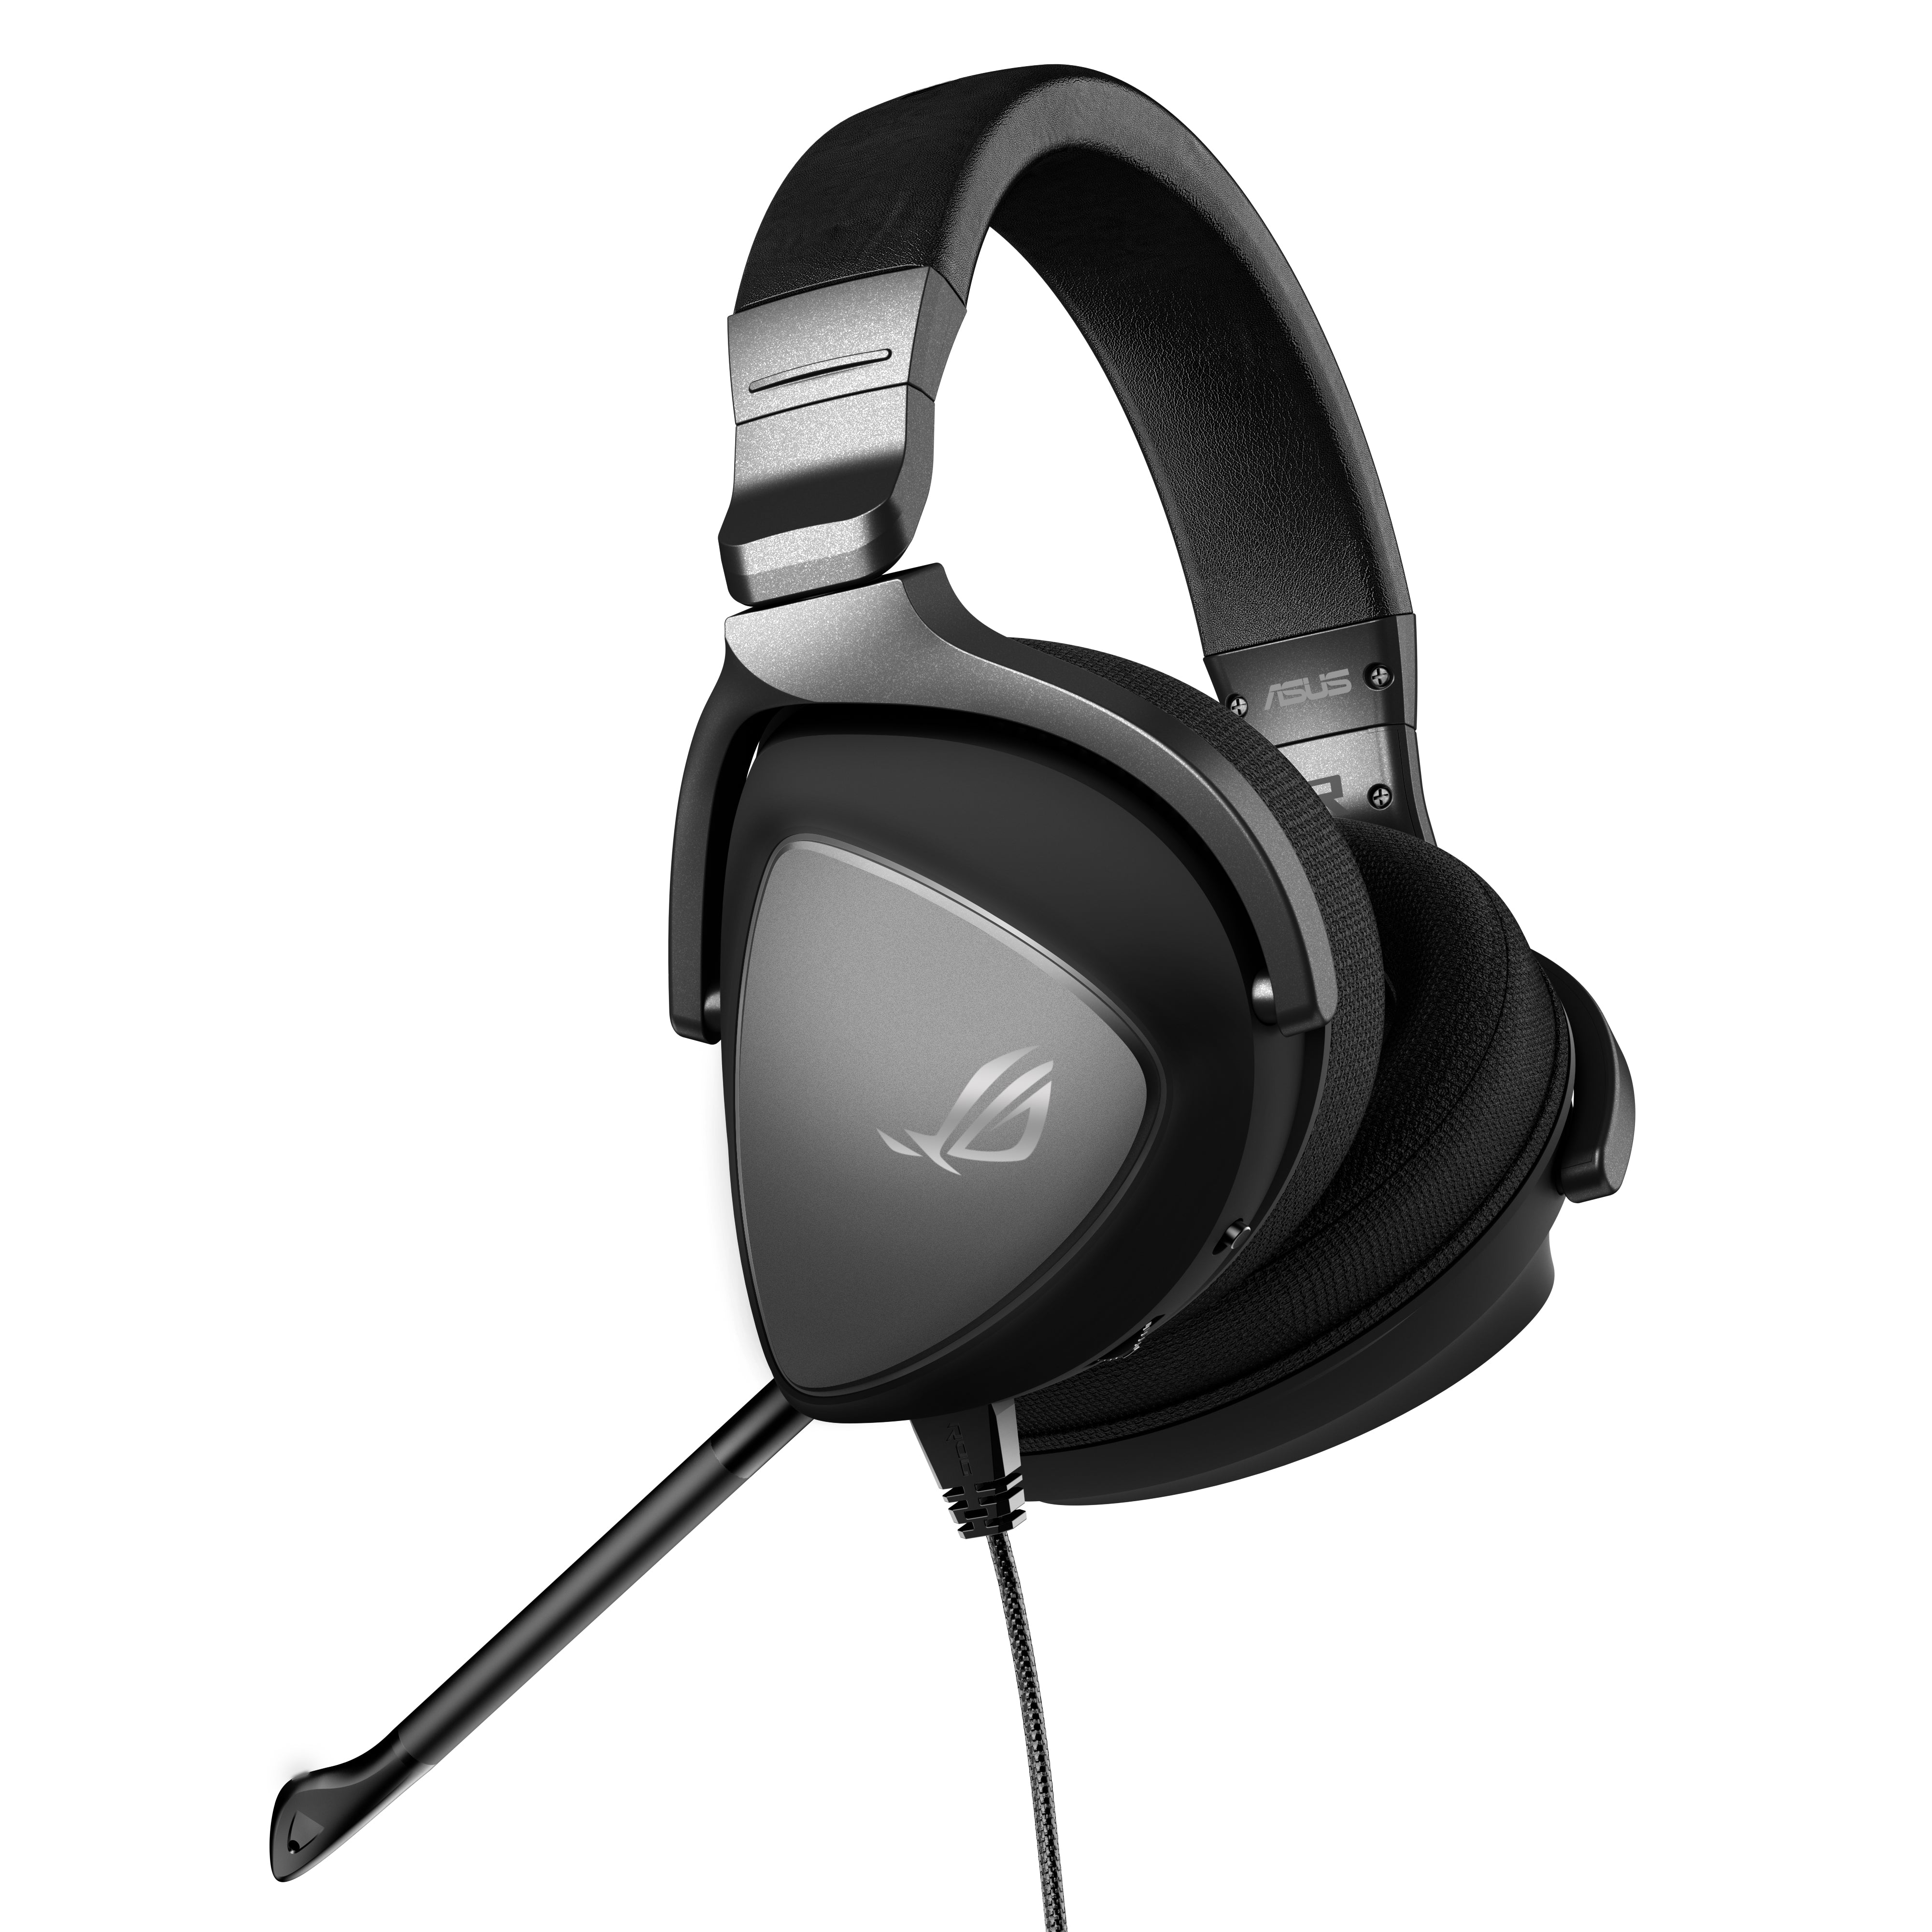 ASUS Headset ROG Delta S Gaming Headset